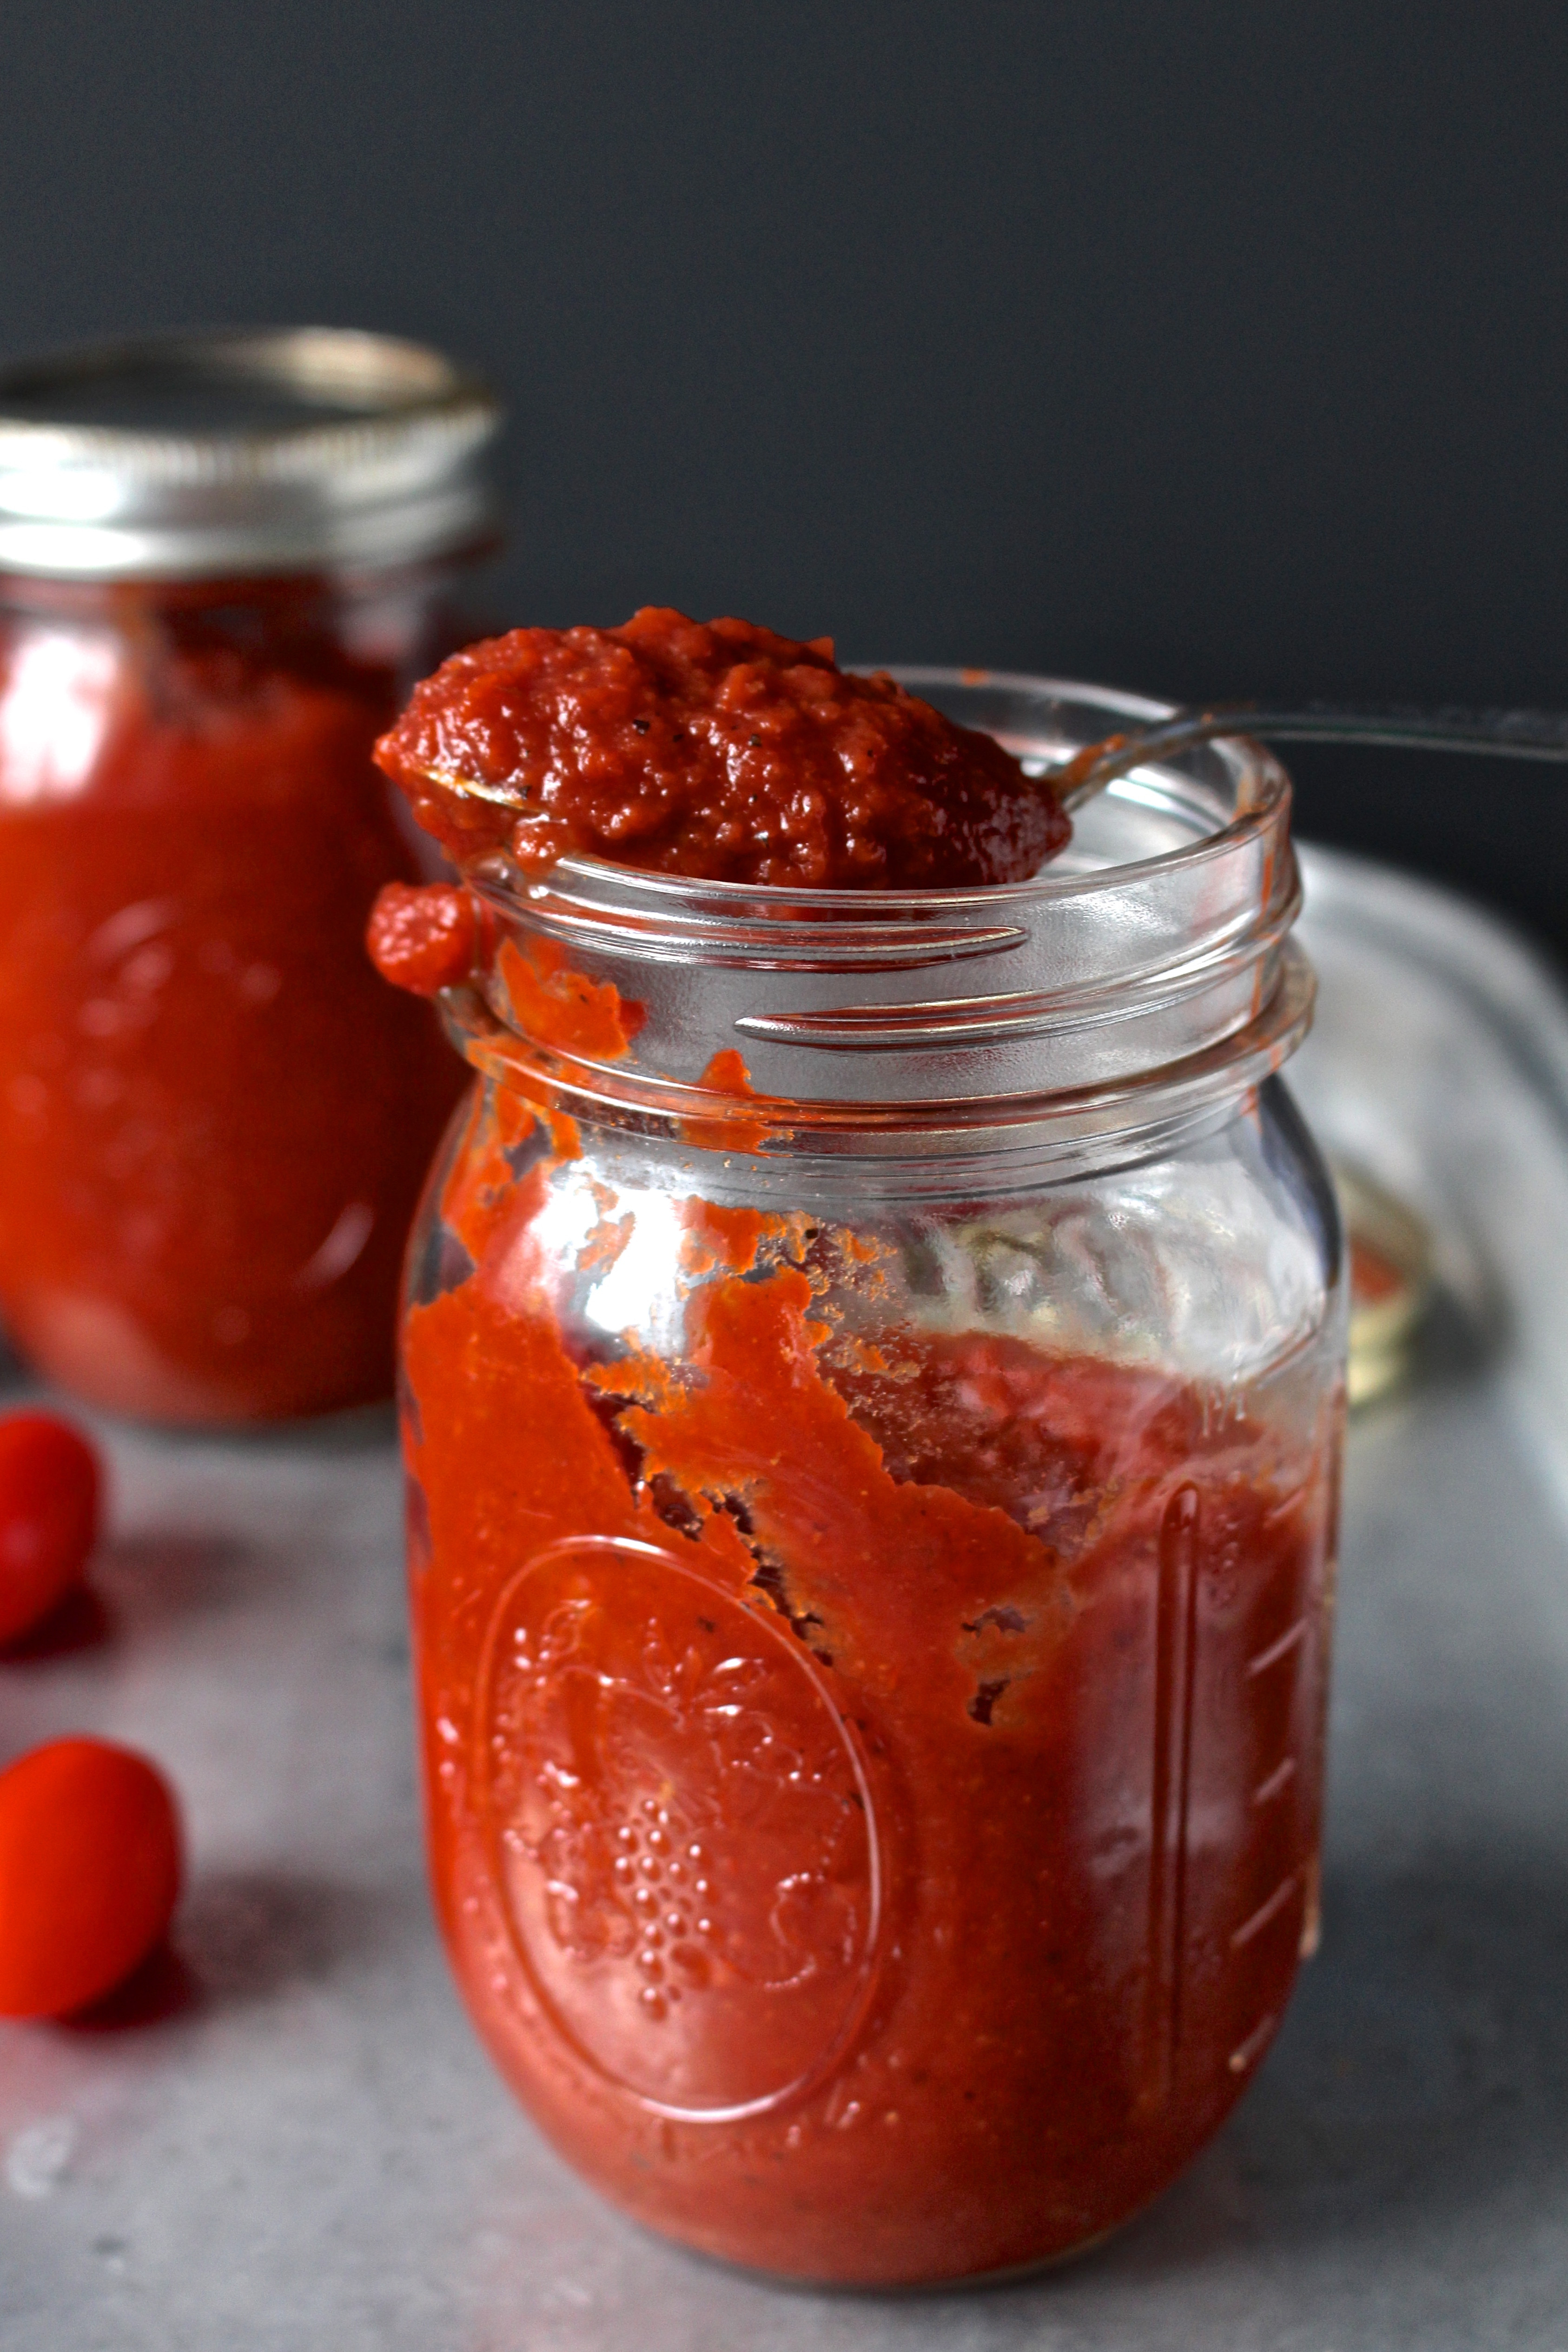 Make Tomato Sauce From Tomato Paste
 make ketchup from tomato paste